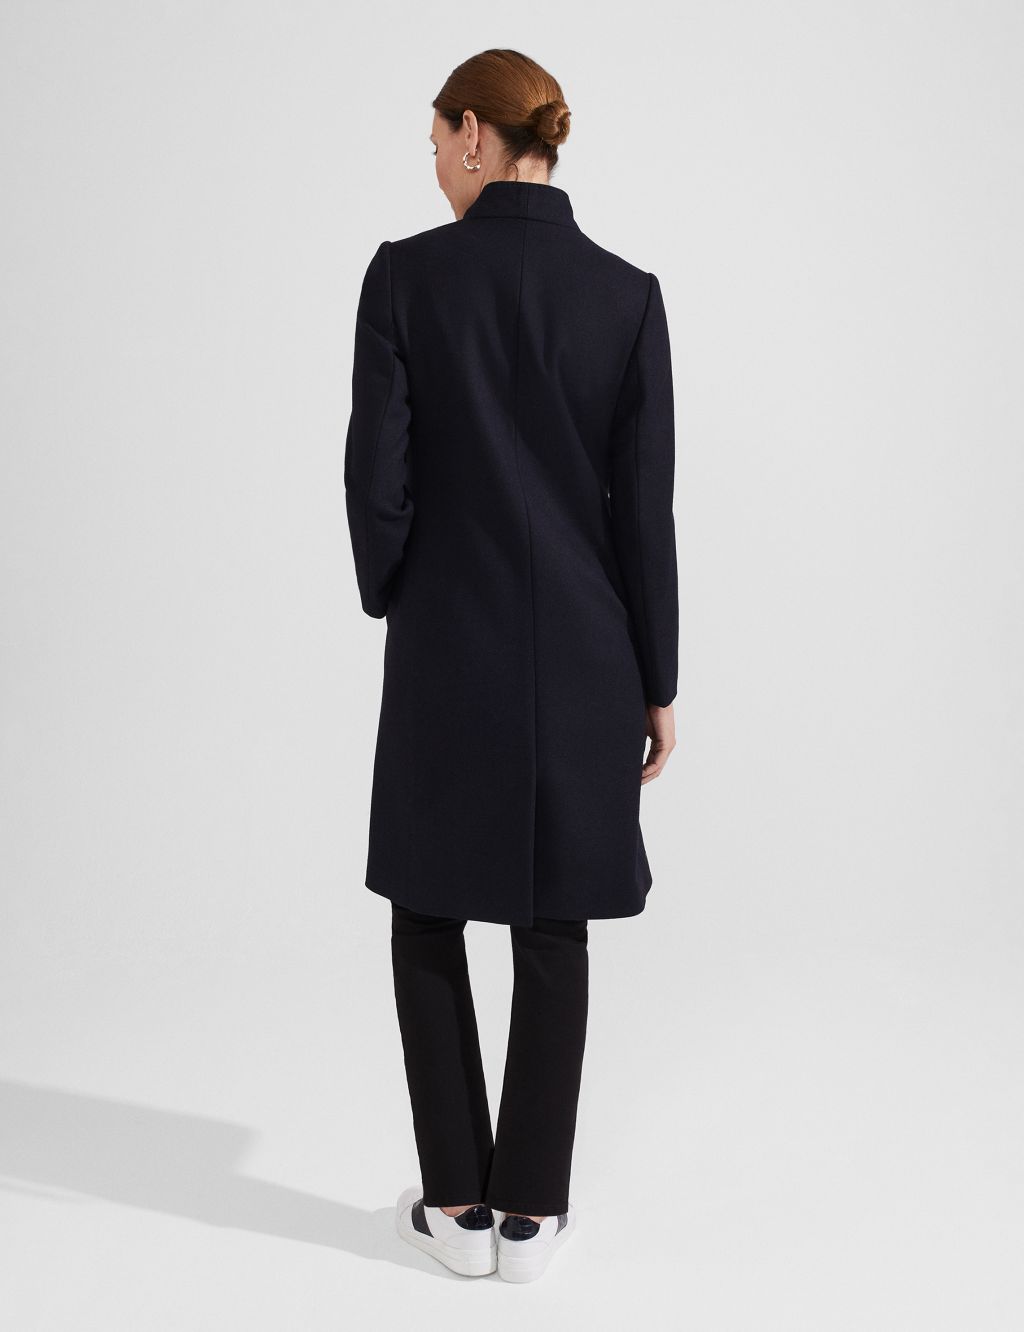 Wool Rich High Neck Tailored Coat image 6